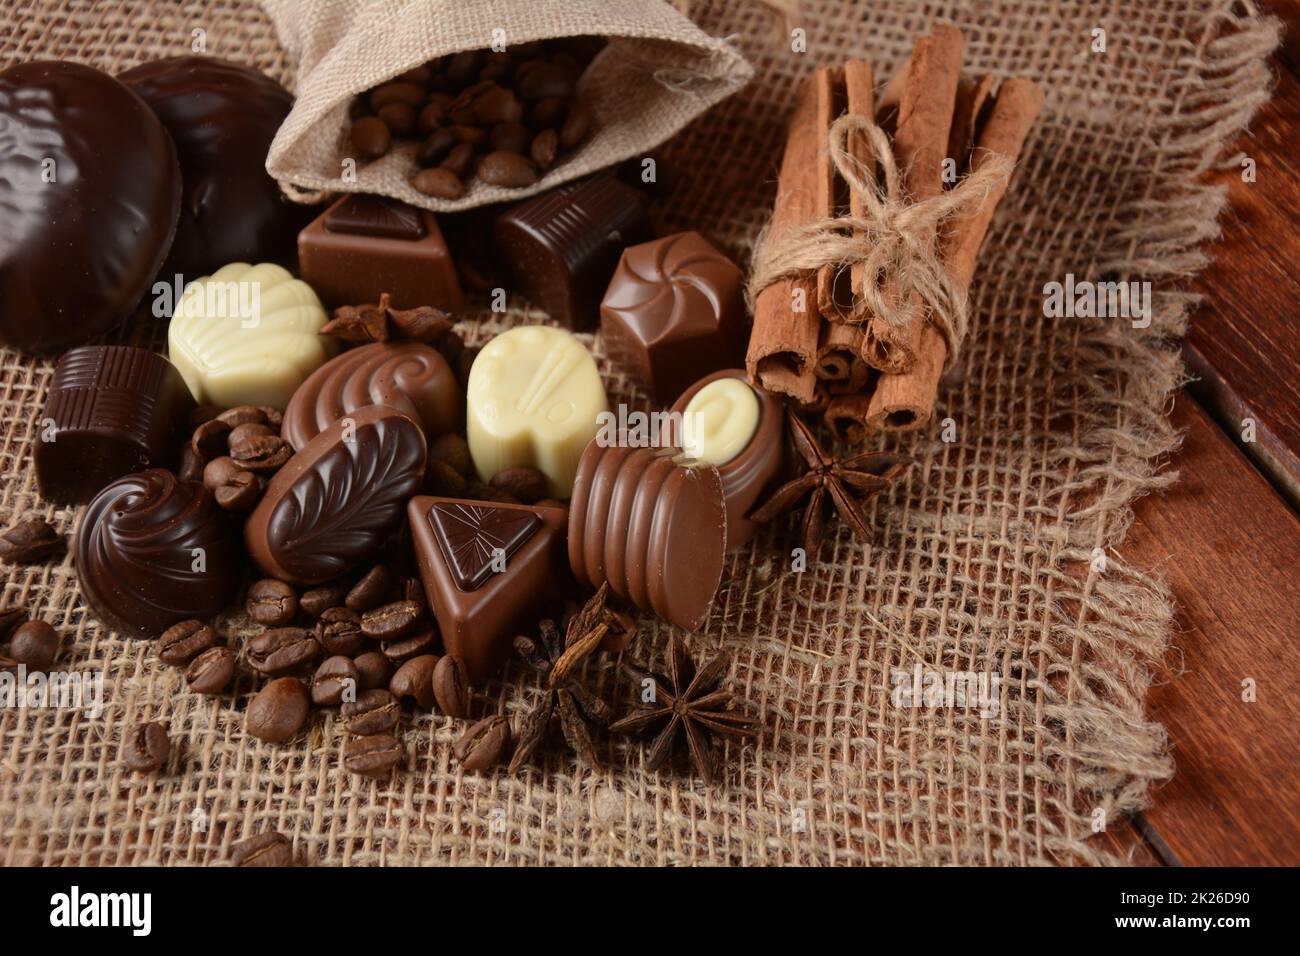 Assortment of dark, white and milk chocolate sweets, zefir (zephyr). Chocolate and coffee beans on rustic wooden sacking background. Spices, cinnamon. Chocolates background. Stock Photo